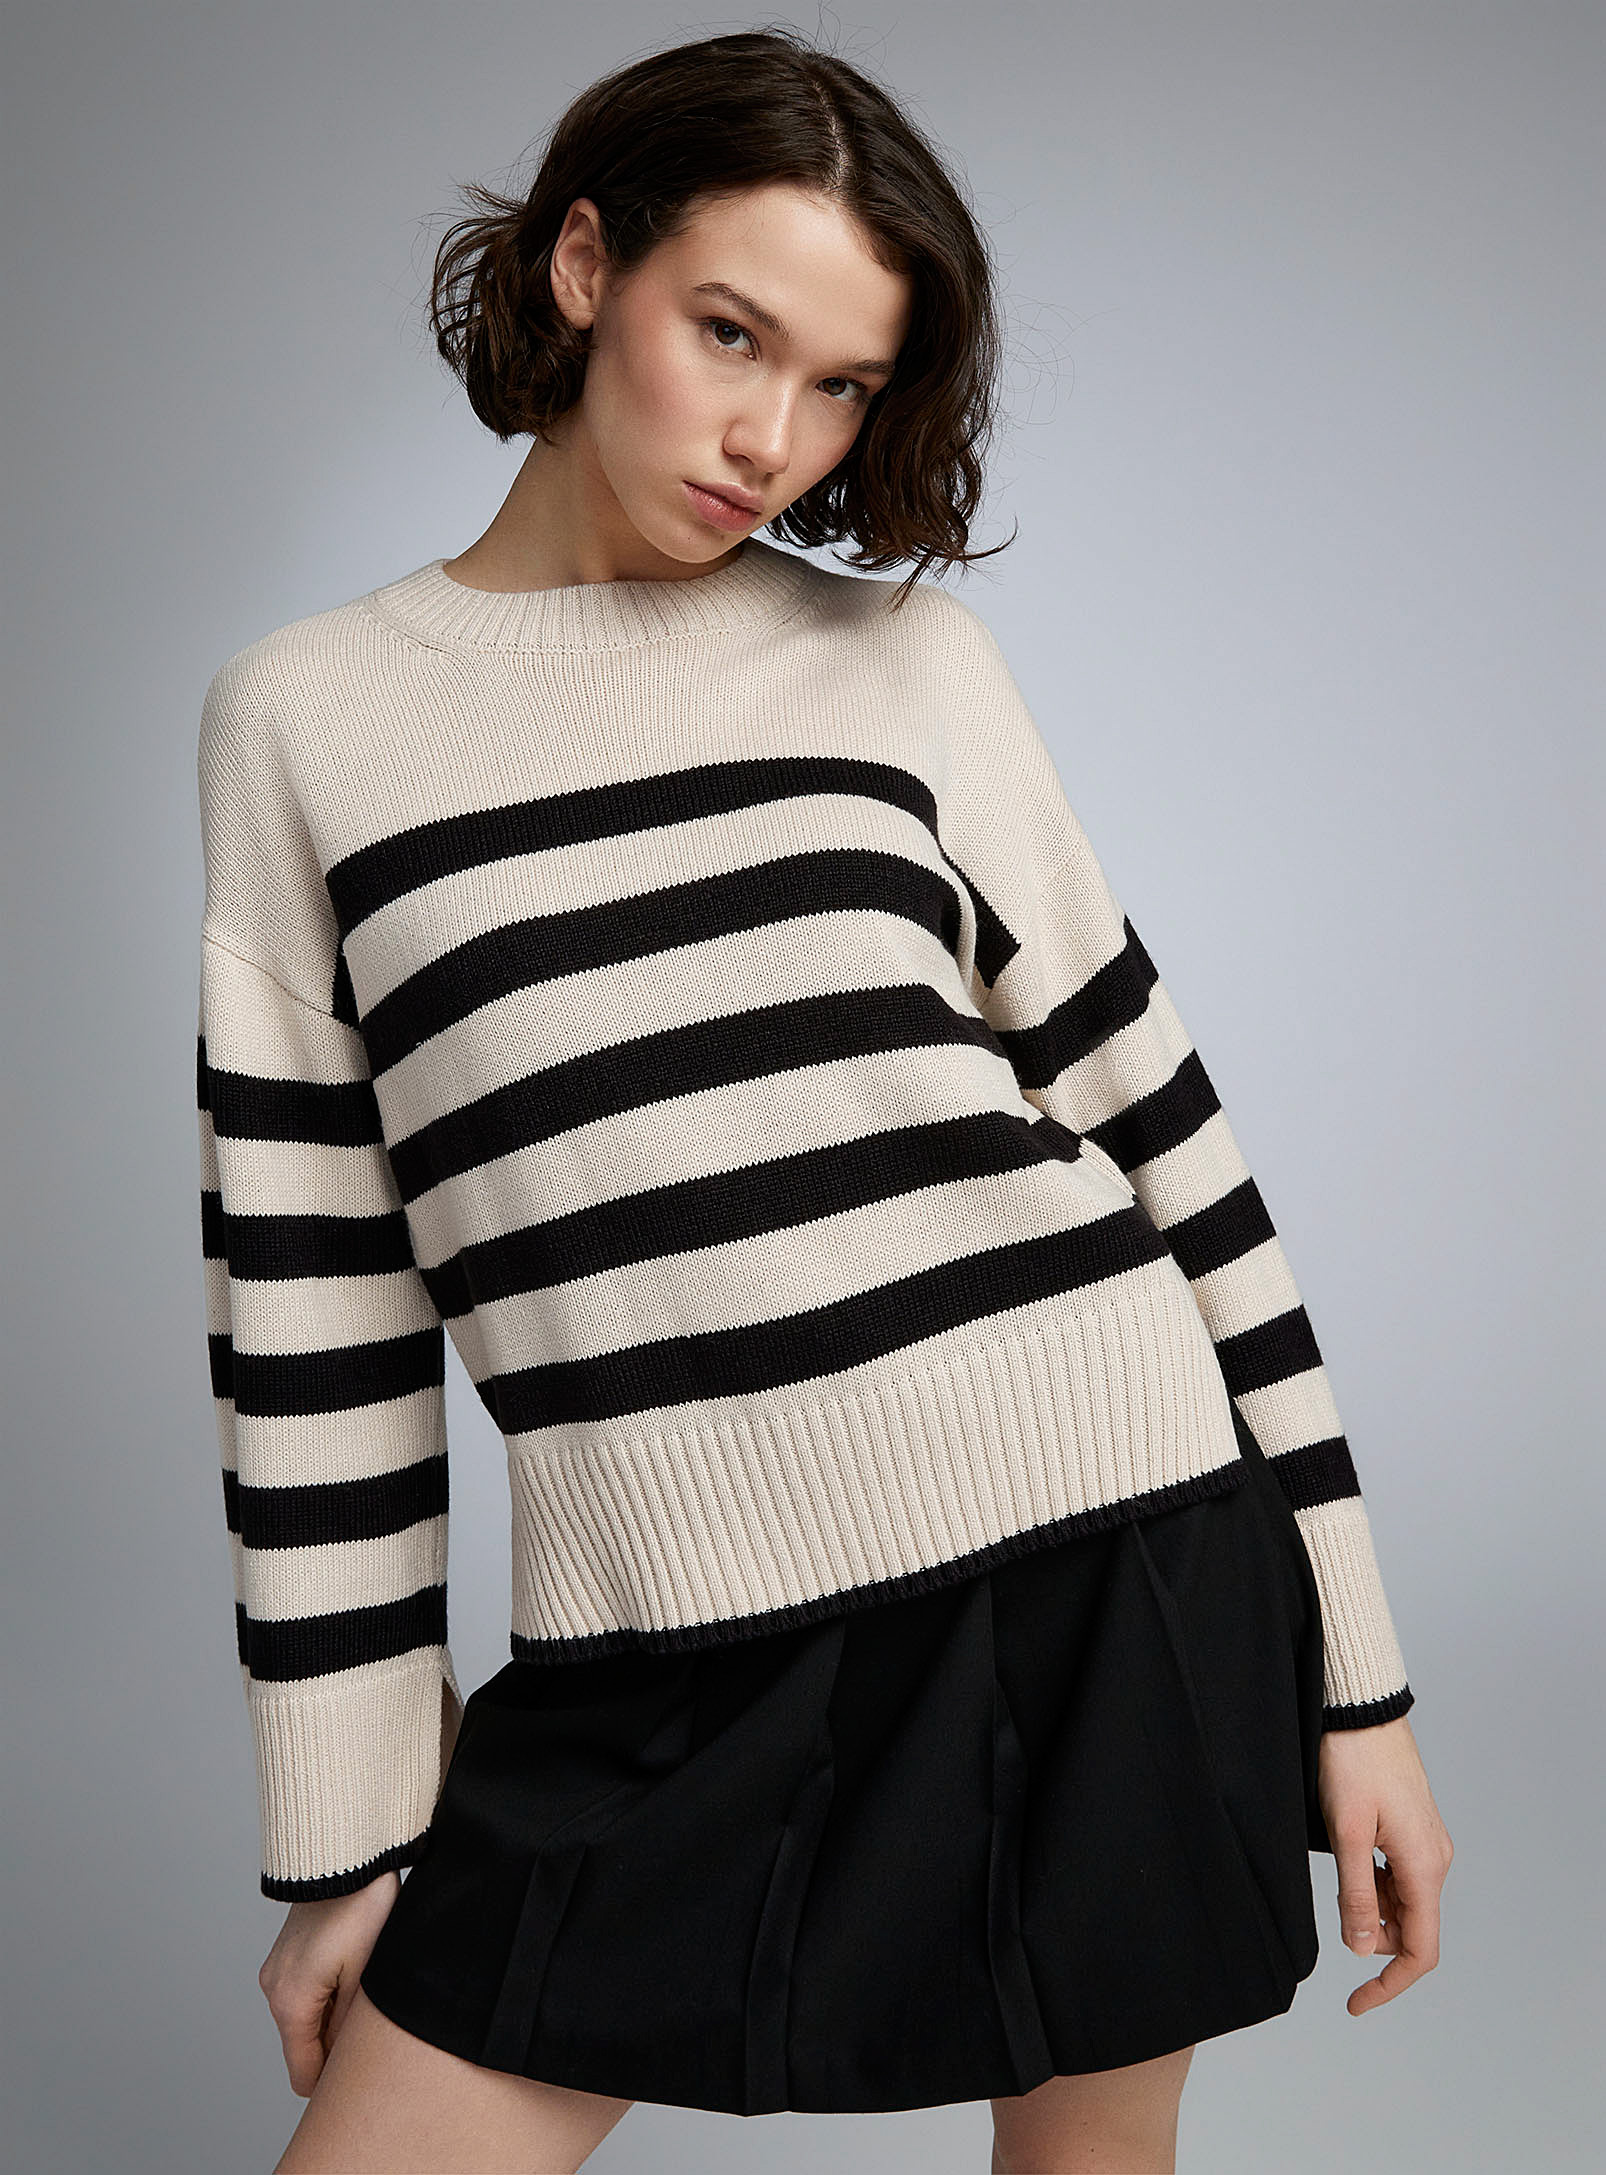 Twik Nautical Stripes Sweater In Patterned White